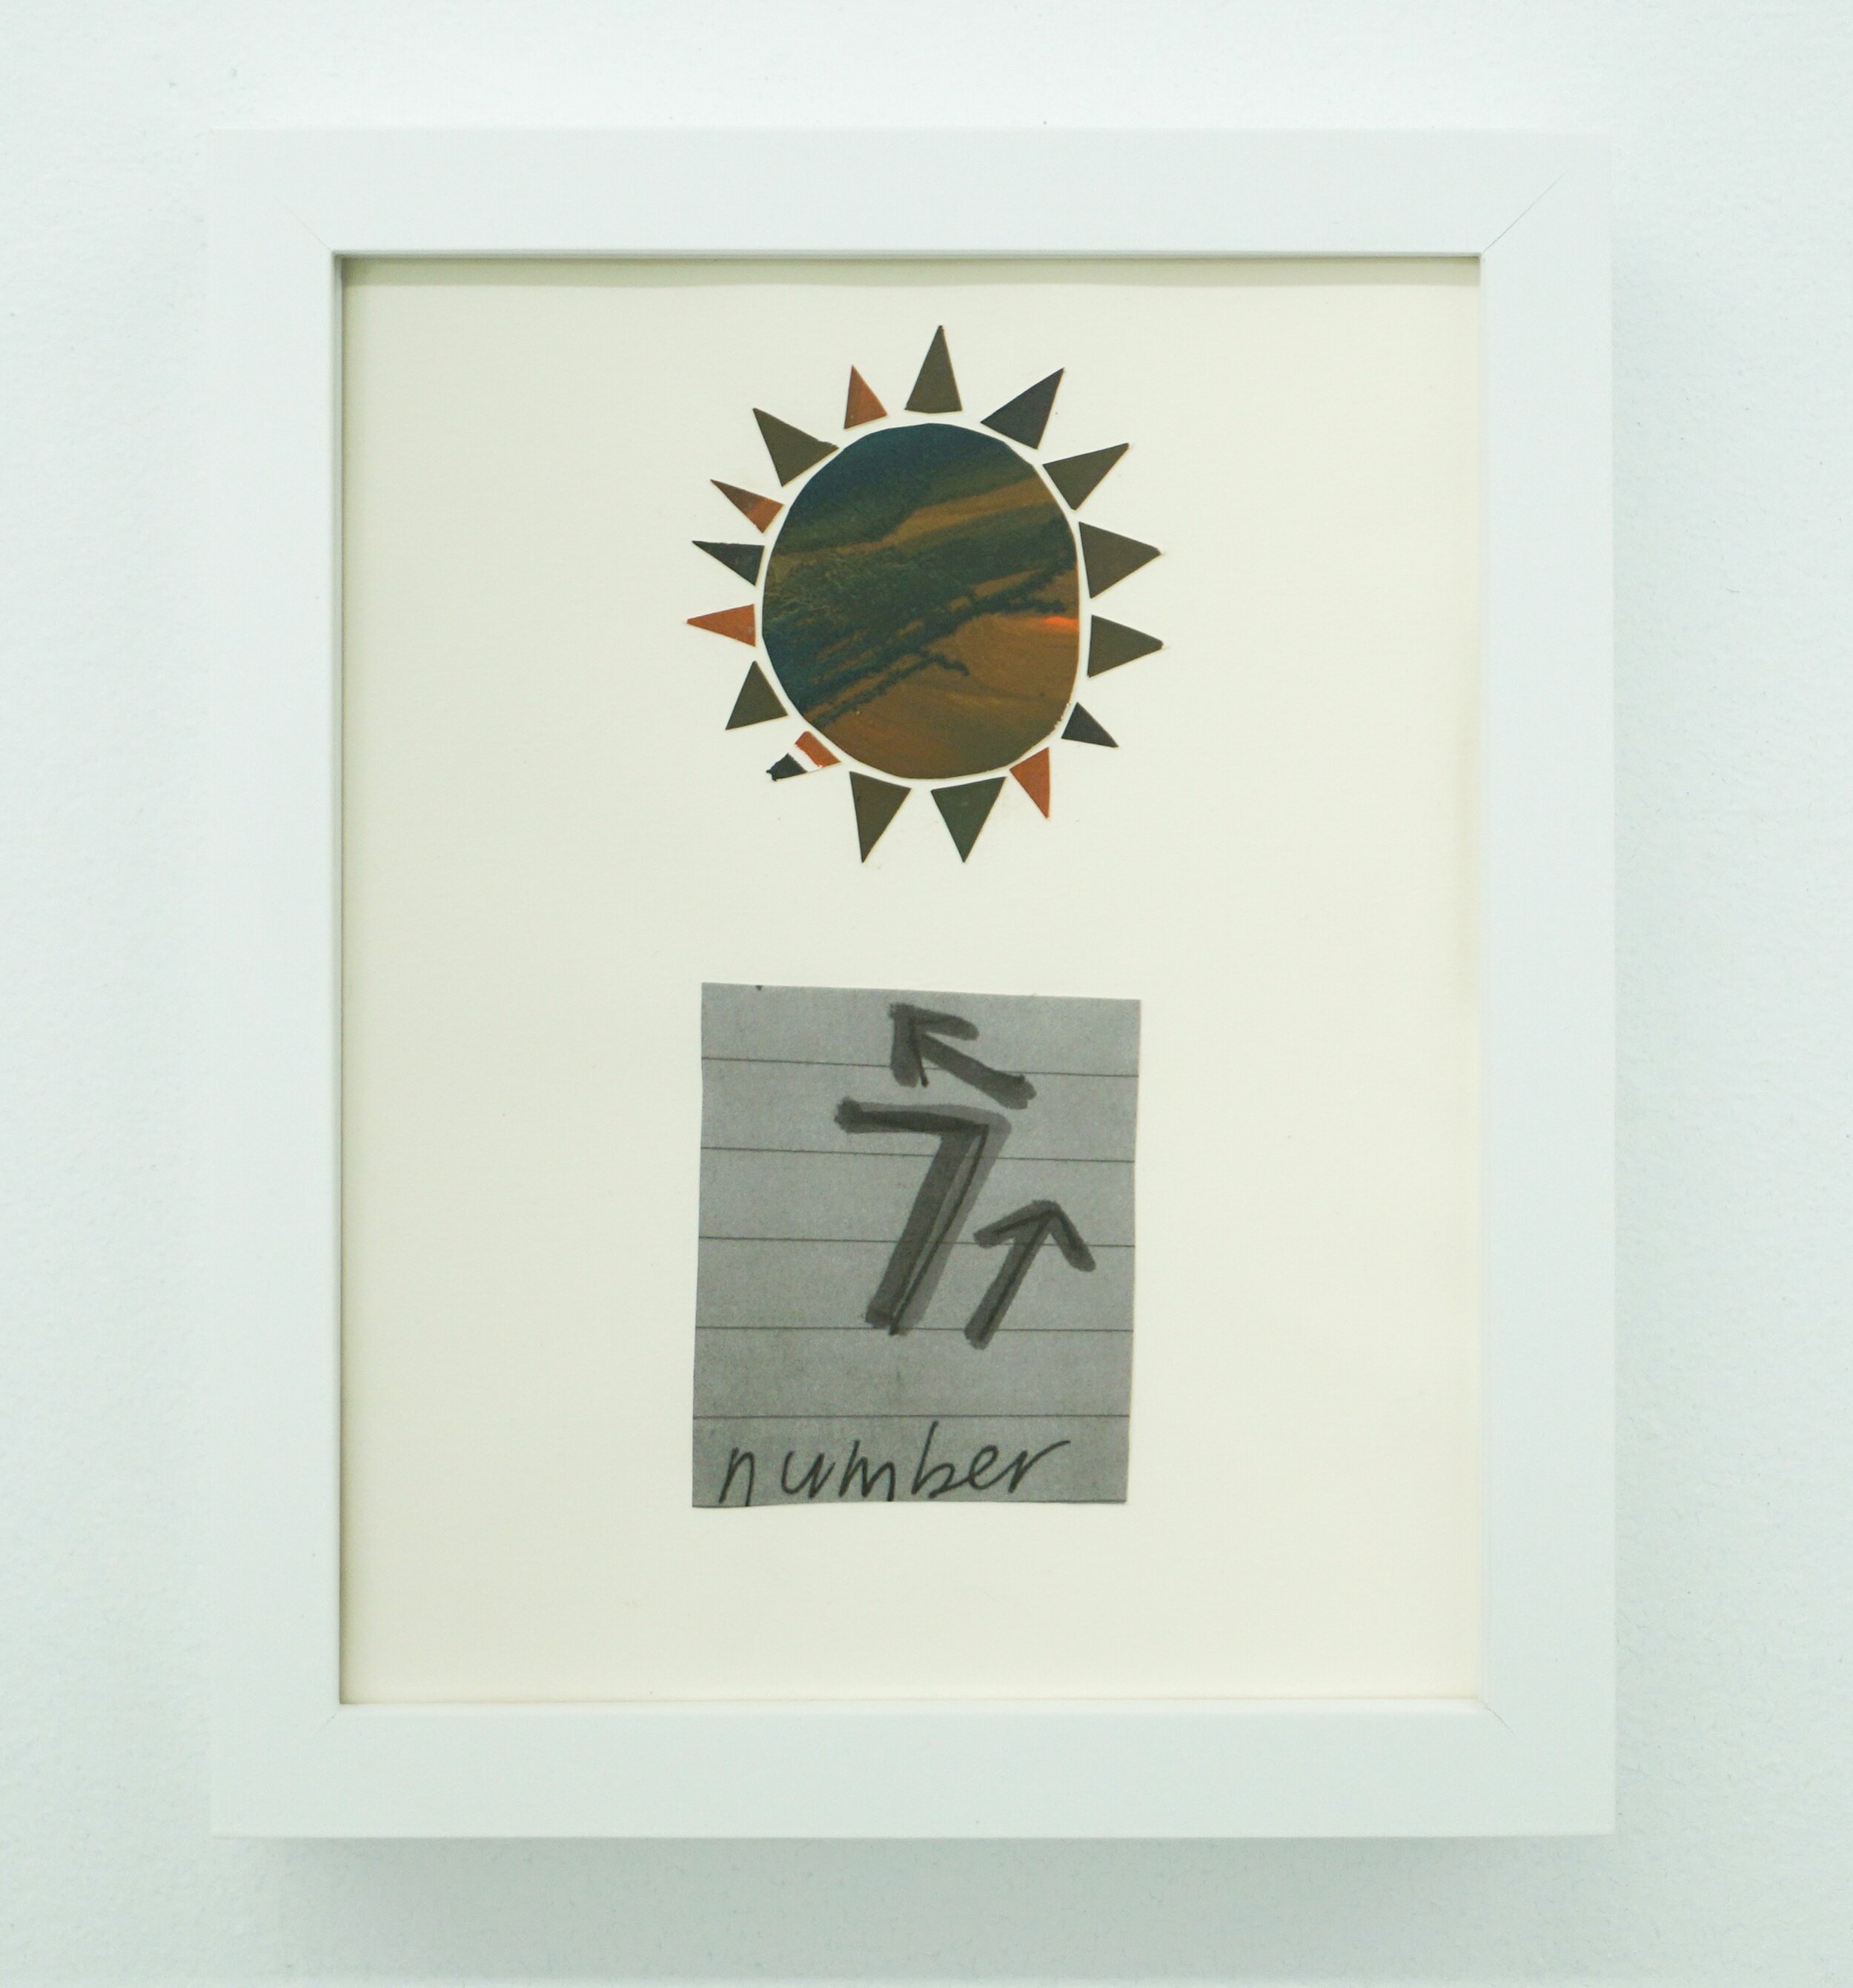 Justine Rivas  'Number', 2021  Collage on paper 9.5 x 7.5 inches